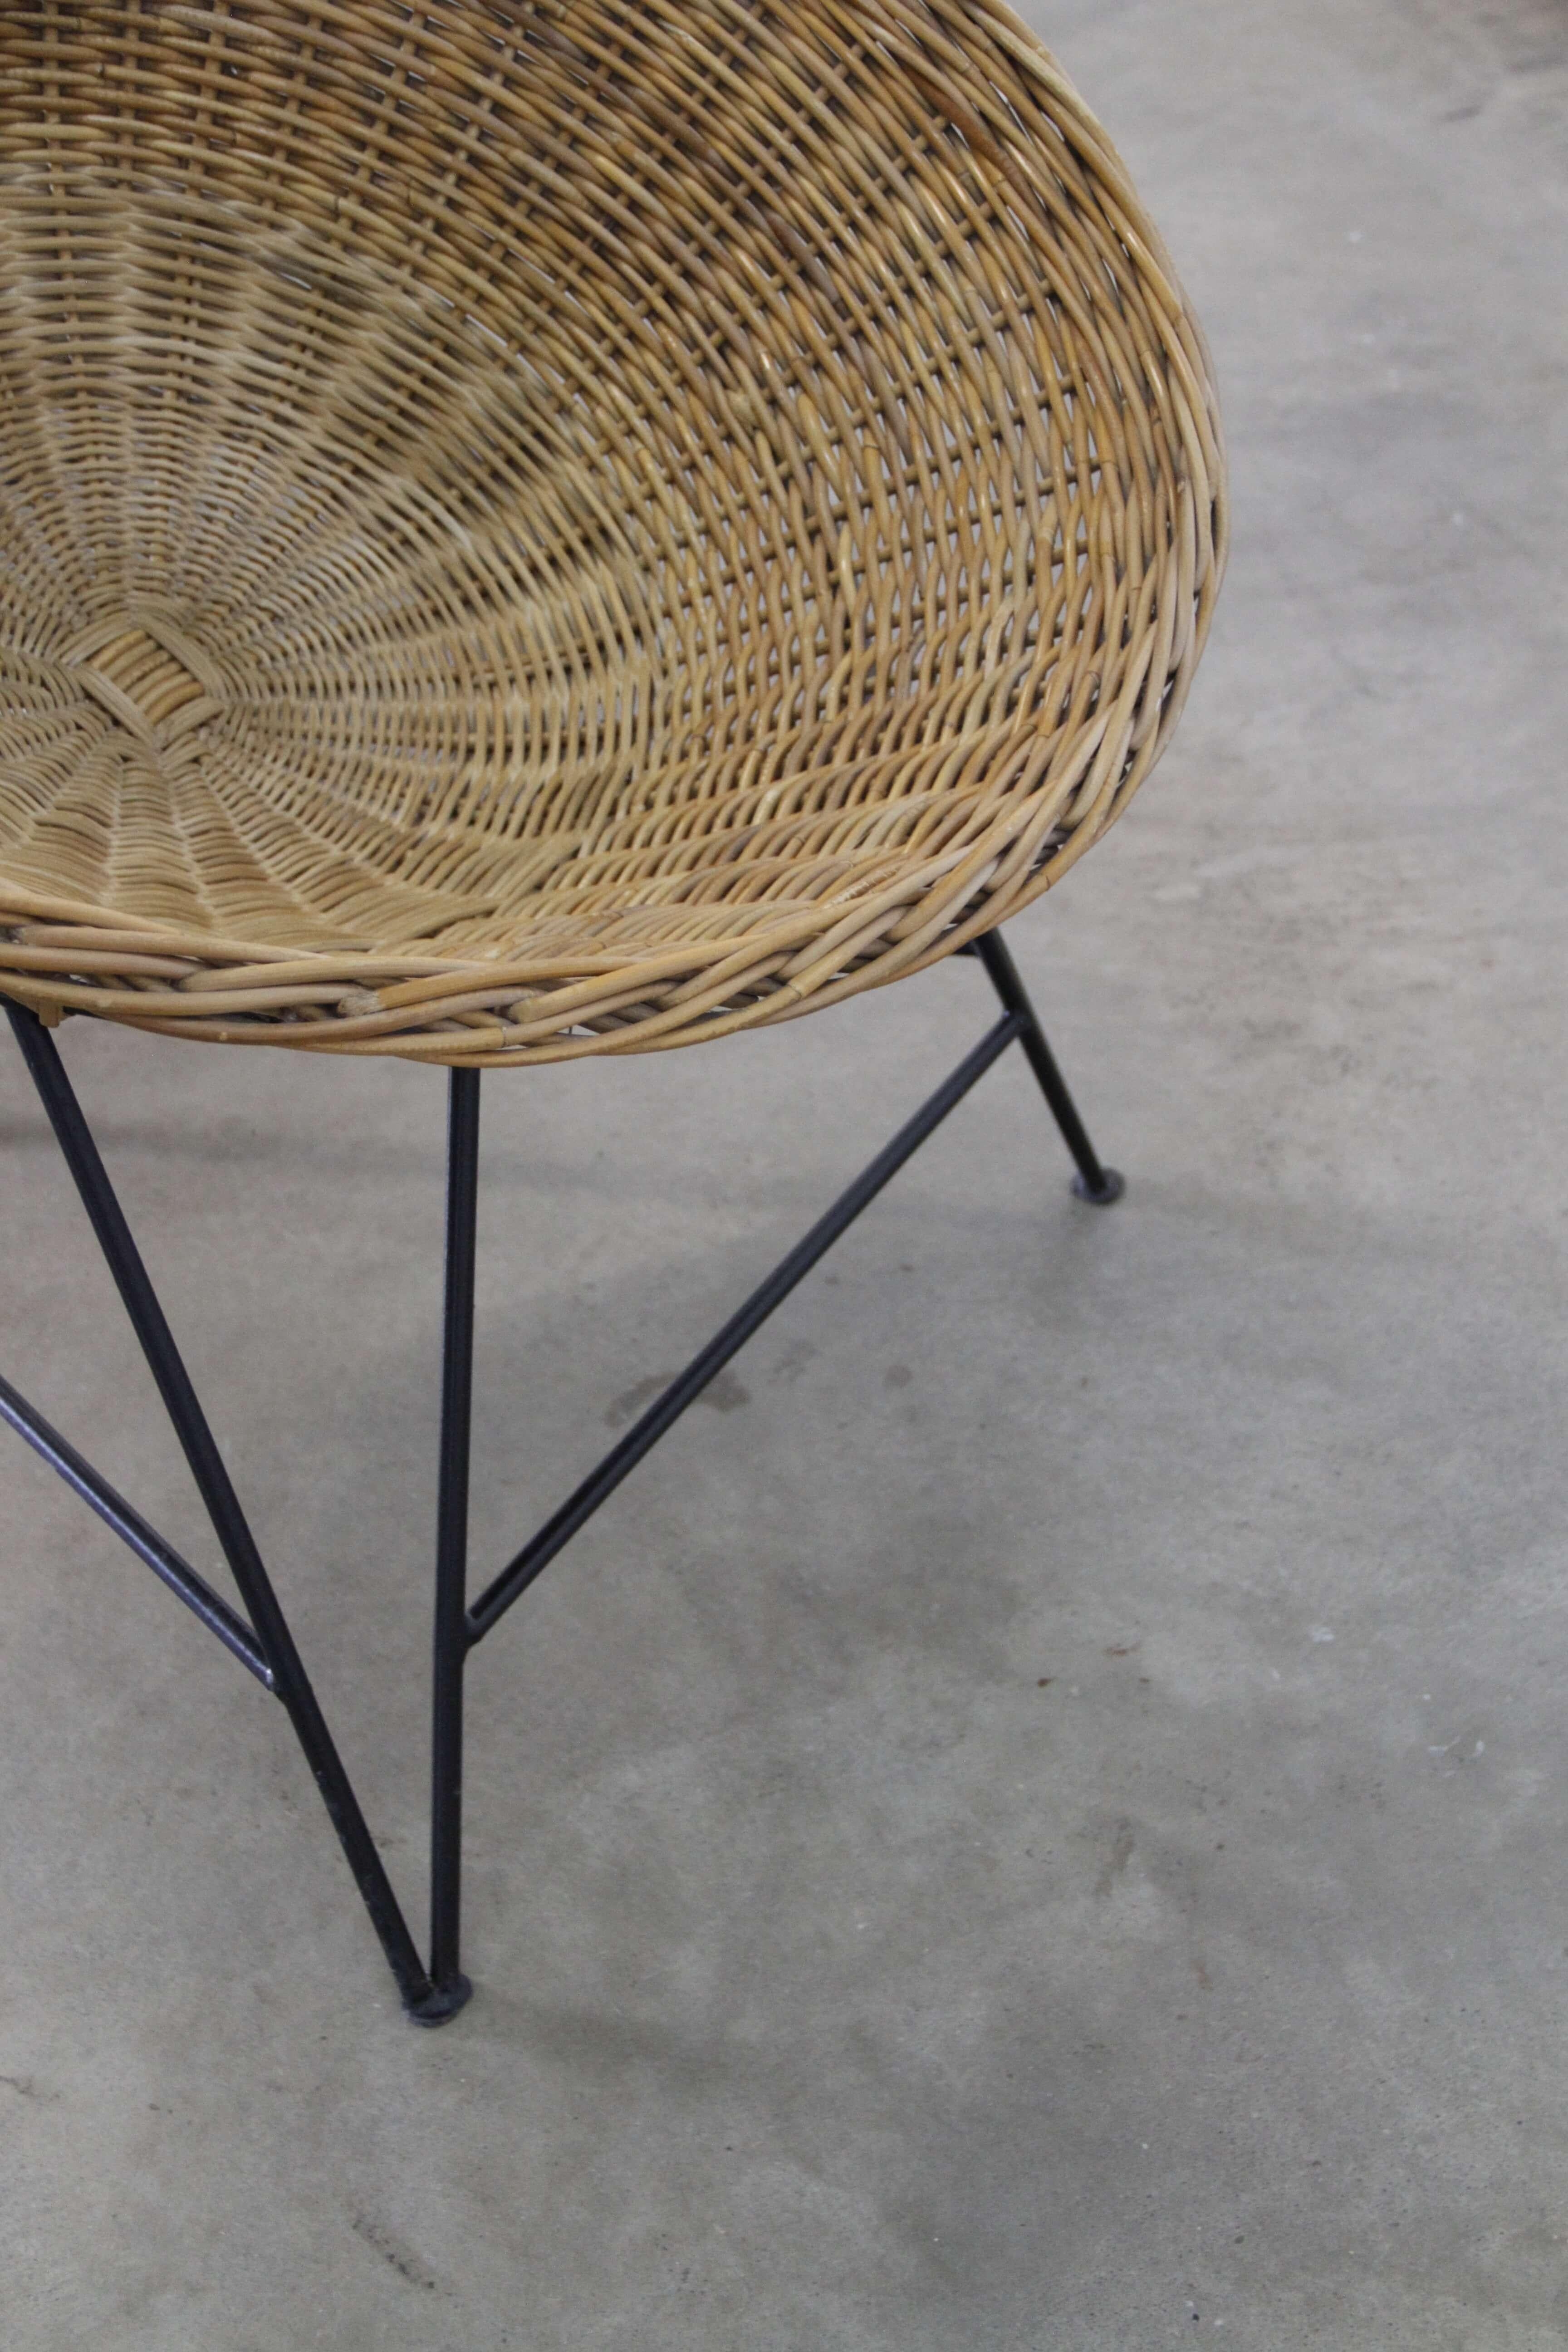 These woven rattan chairs have a metal black frame.